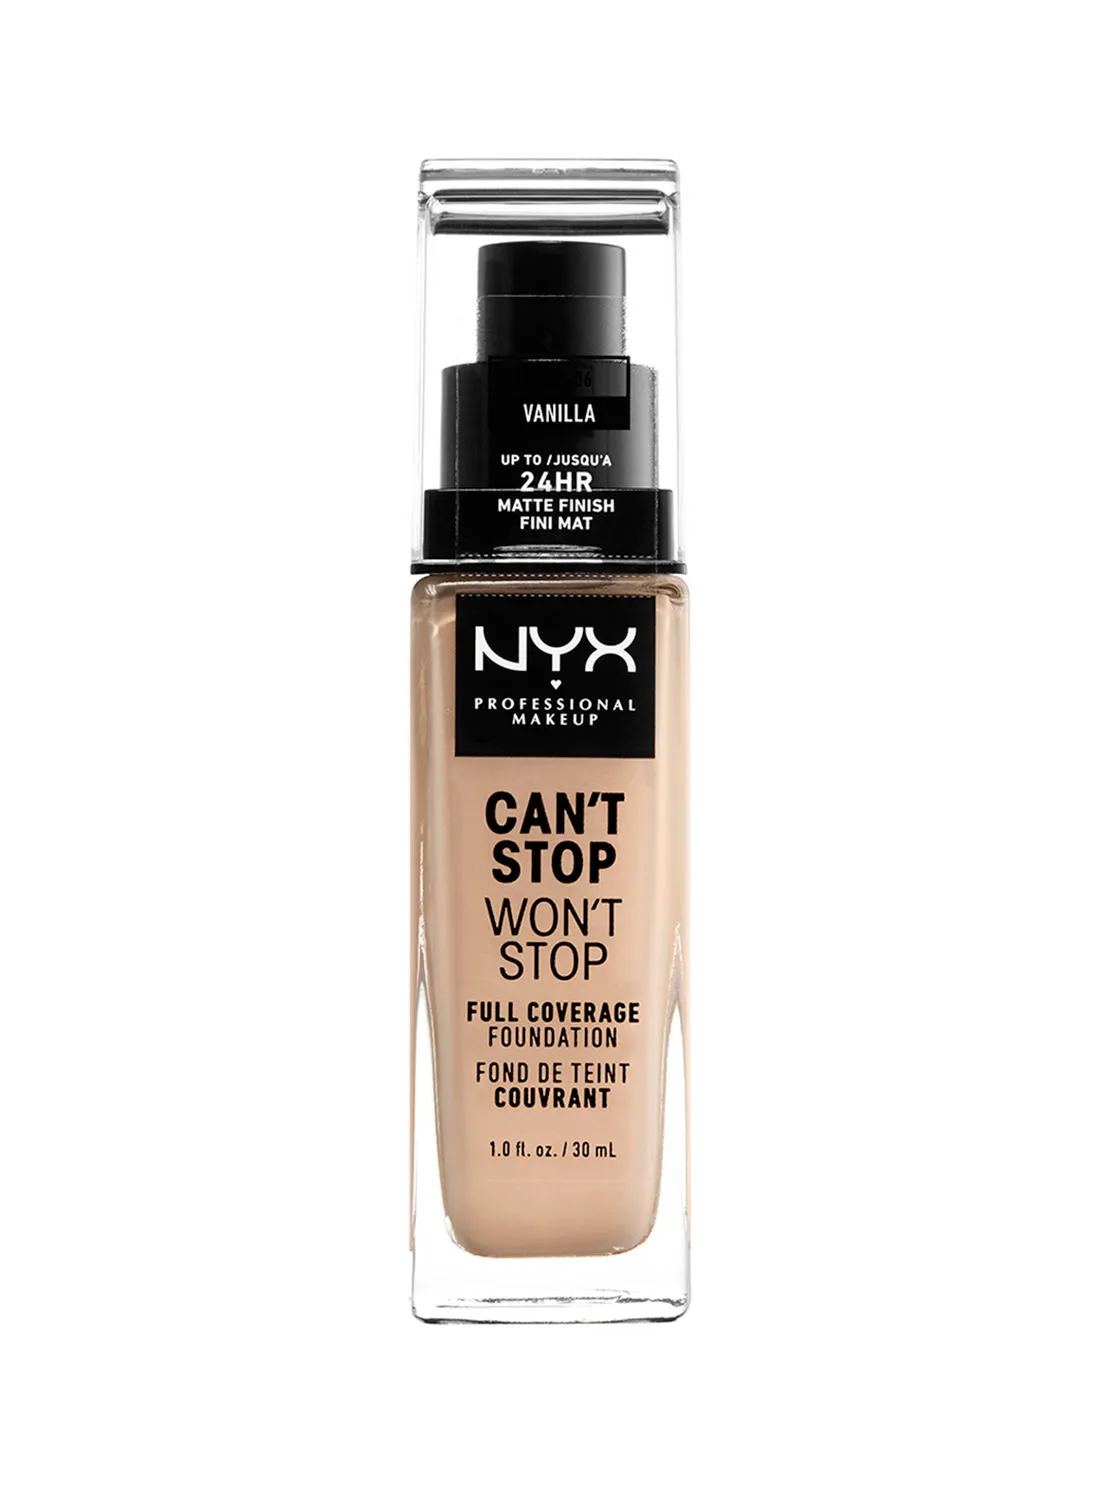 NYX PROFESSIONAL MAKEUP Can't Stop Won't Stop Full Coverage Pigmented Foundation Vanilla